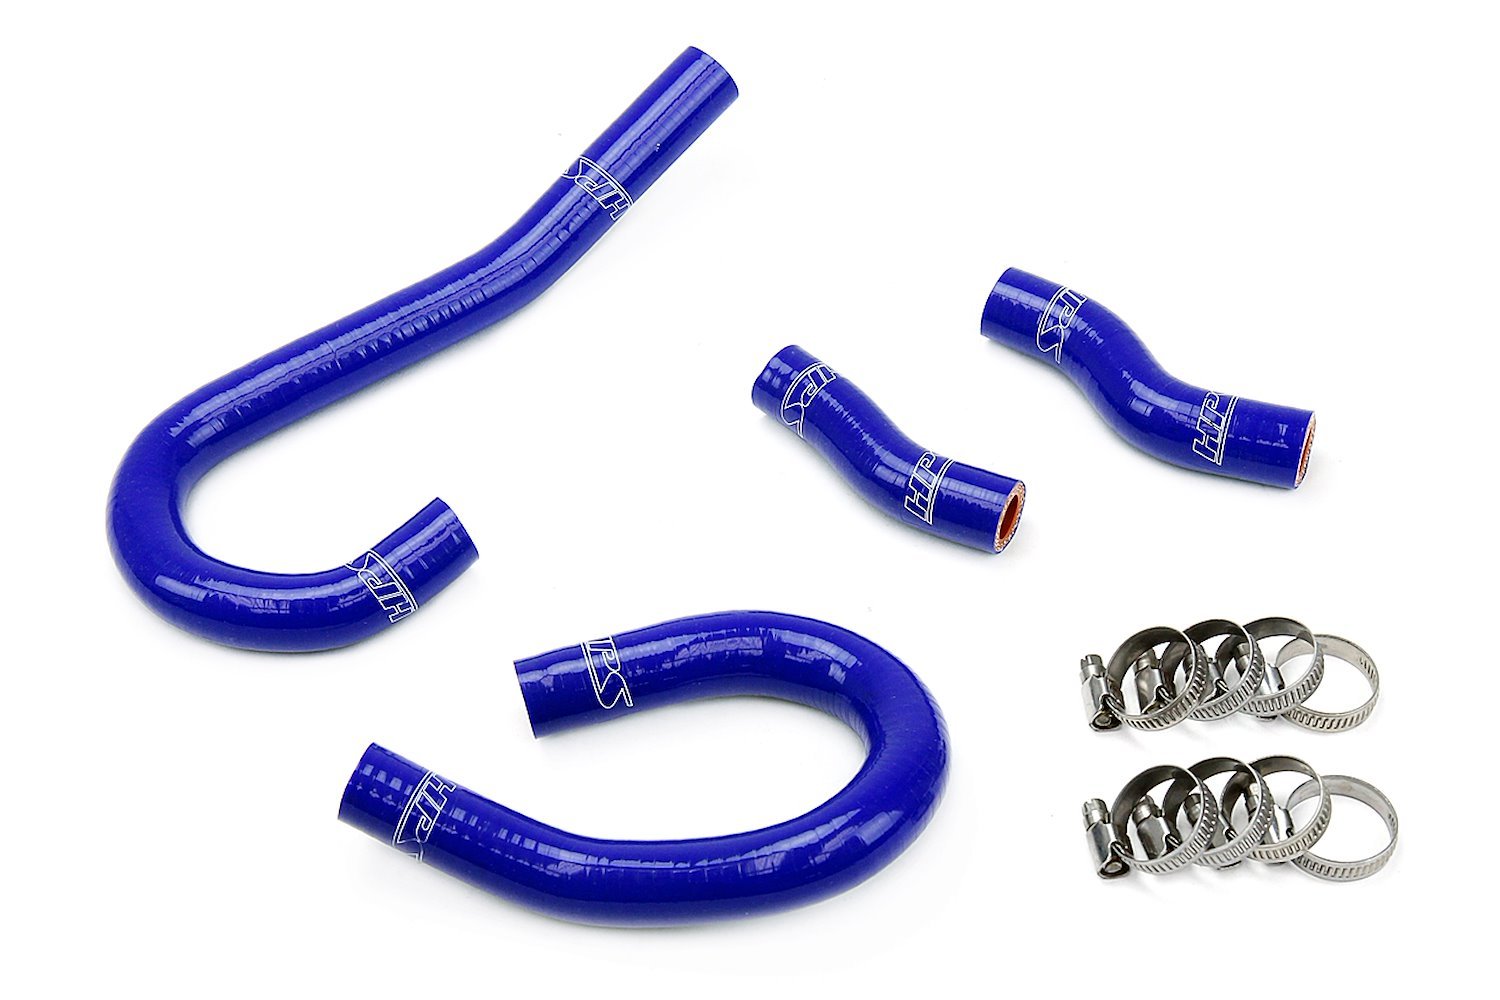 57-1473-BLUE Heater Hose Kit, High-Temp 3-Ply Reinforced Silicone, Replace OEM Rubber Heater Coolant Hoses